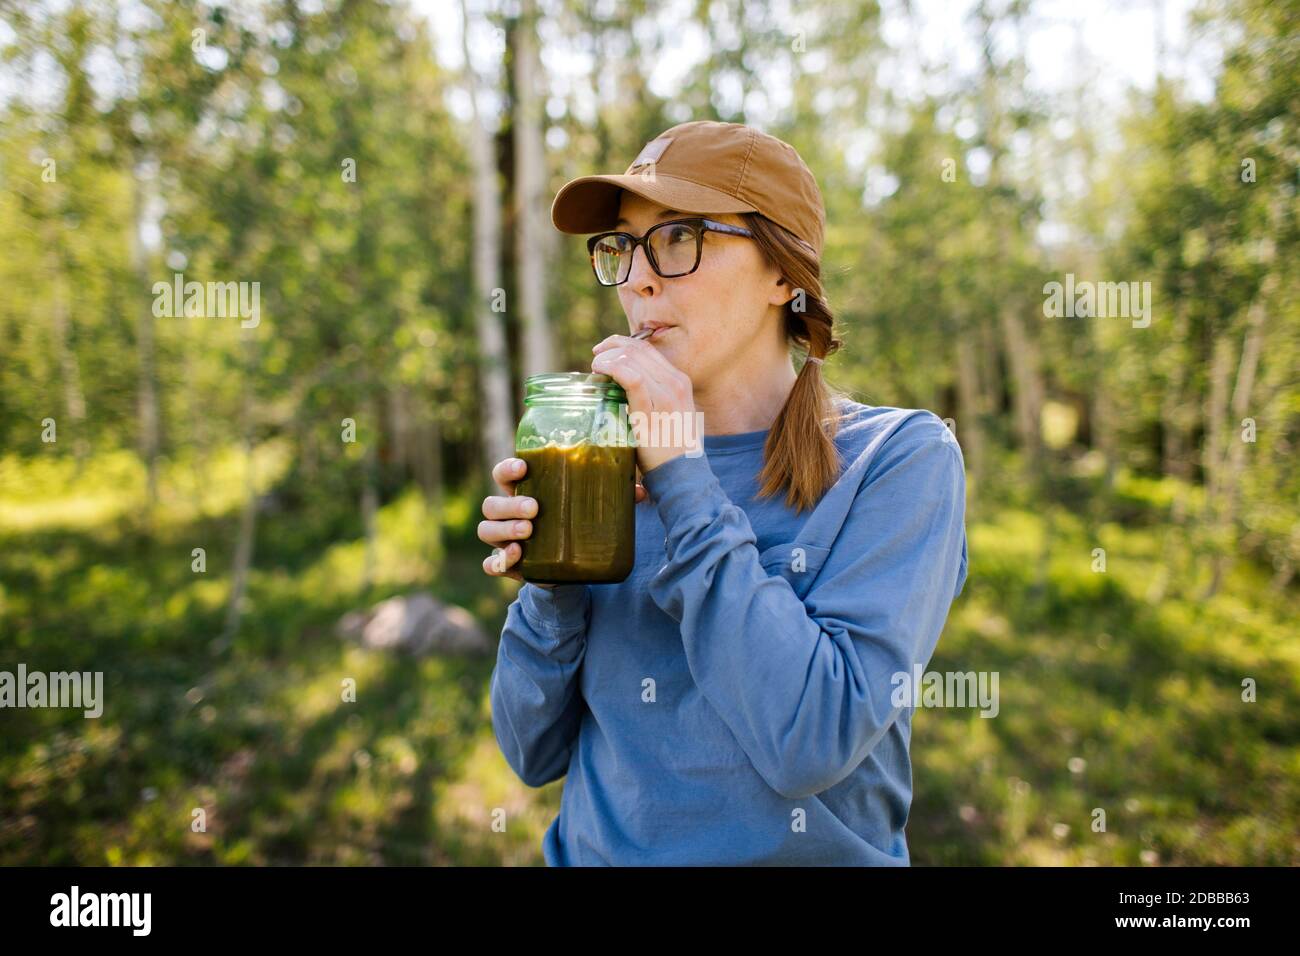 USA, Utah, Uinta National Park, Woman wearing eyeglasses and baseball cap drinking coffee from jar in forest Stock Photo